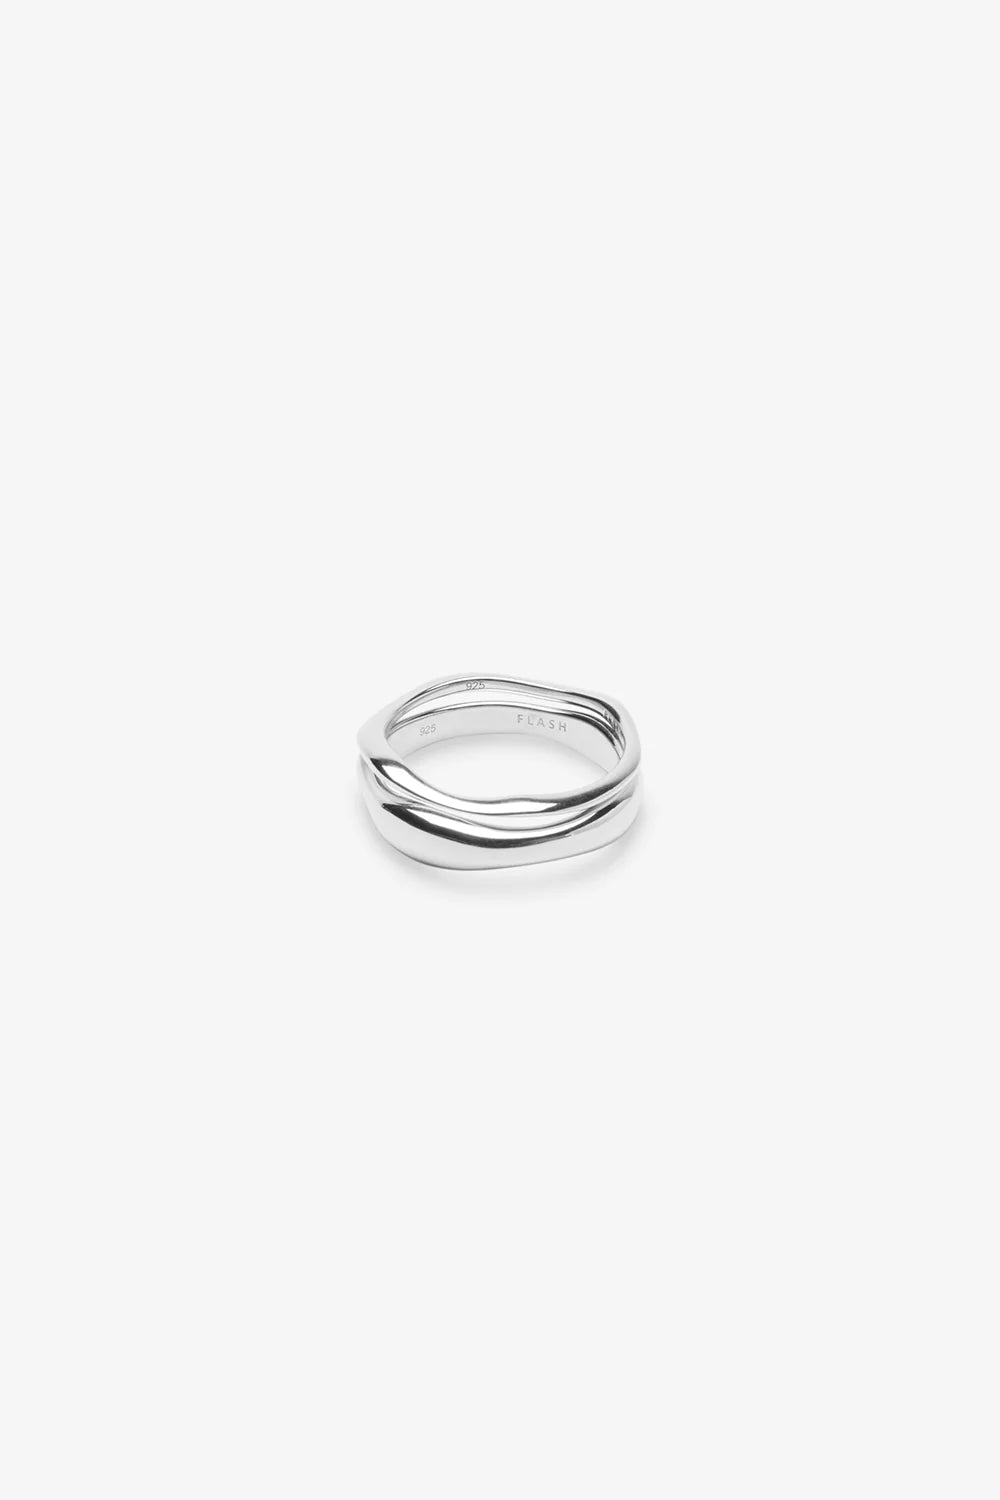 Flash Jewellery Waves Ring Set - Sterling Silver